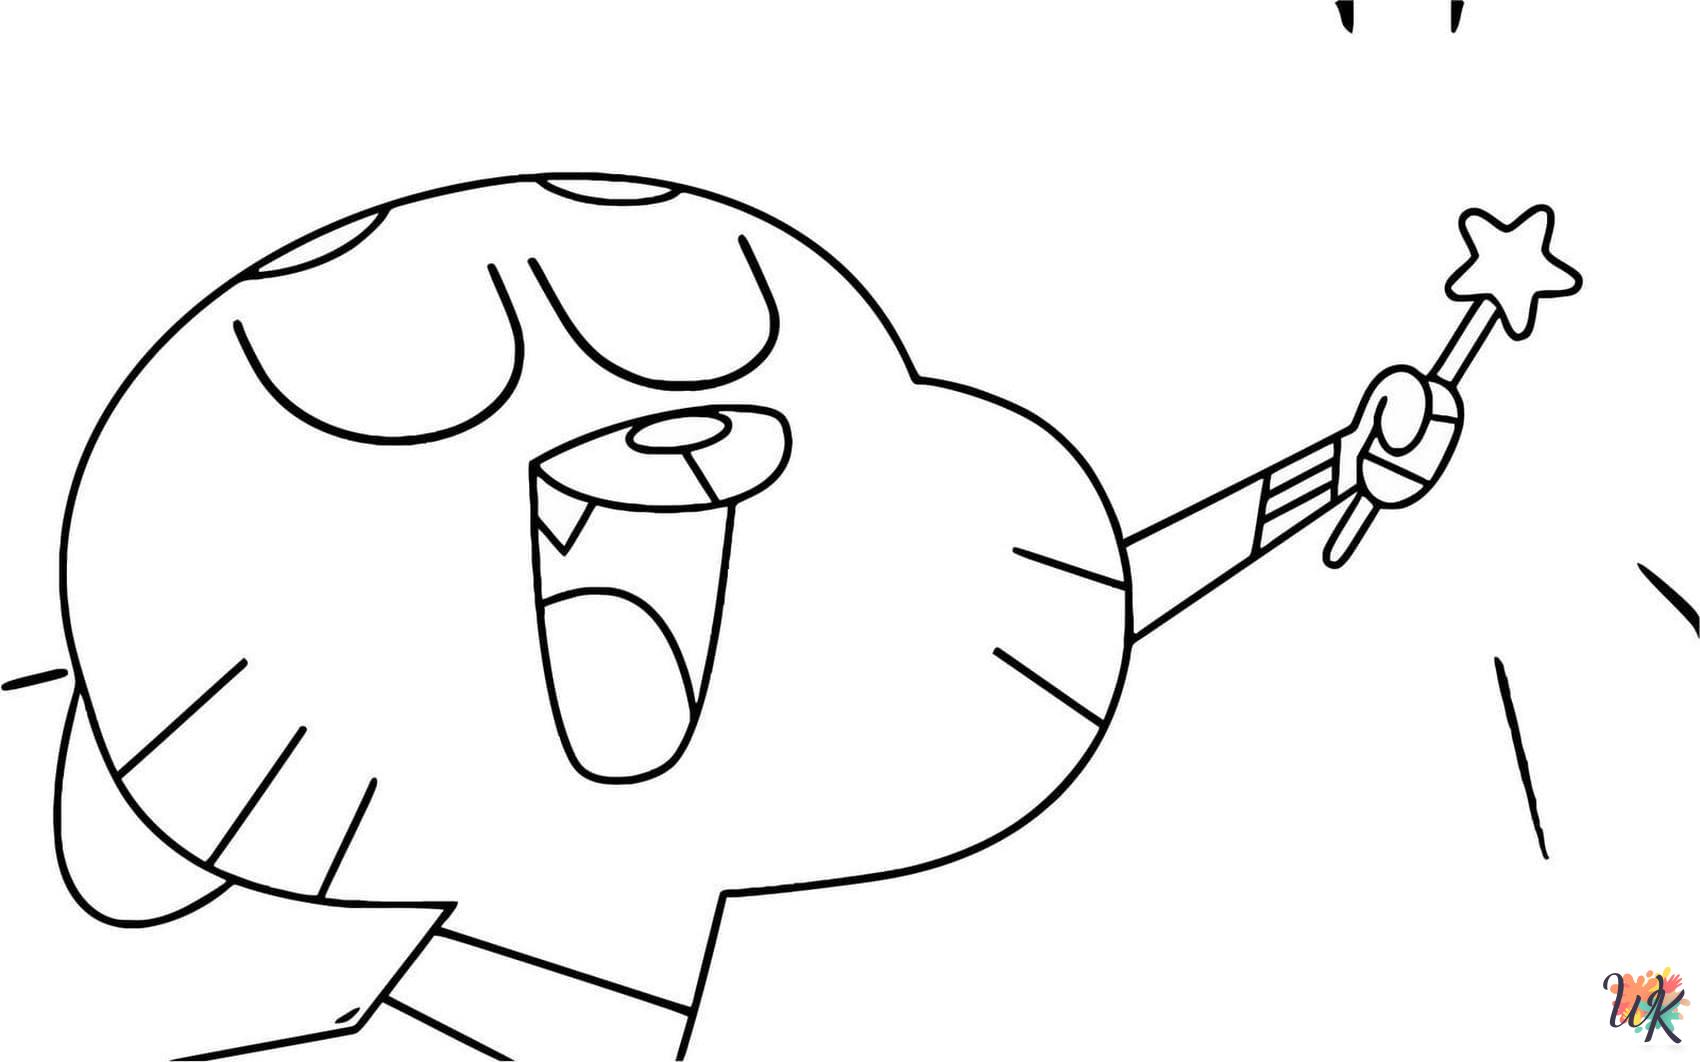 Gumball coloring pages to print 1